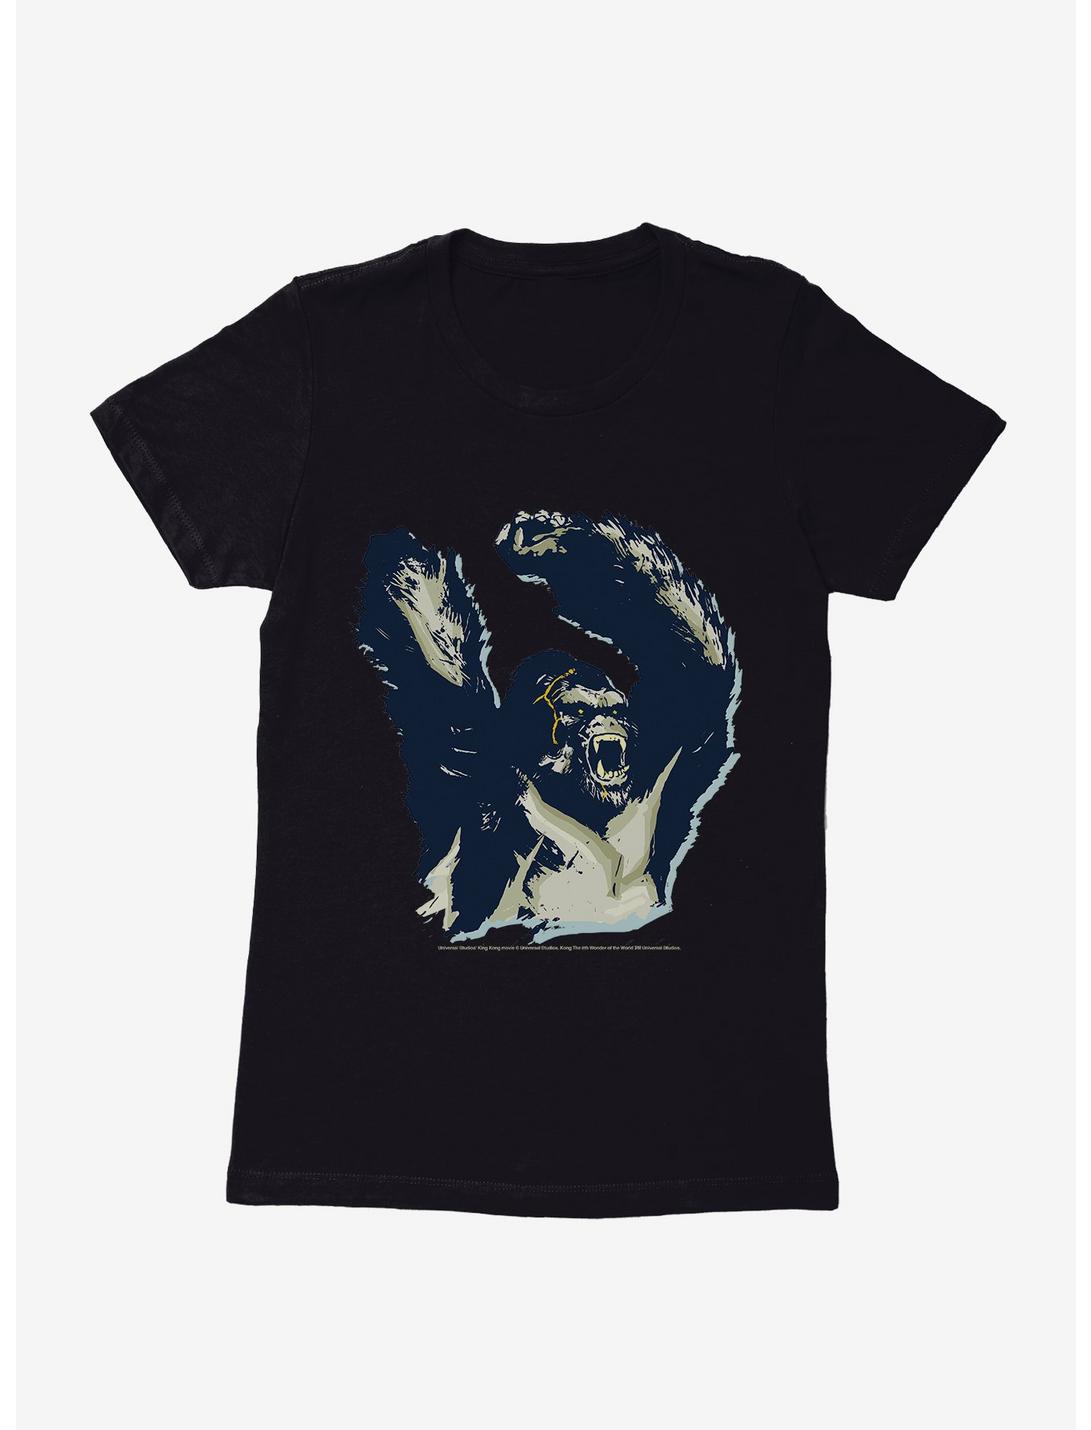 King Kong The King Shaded Outline Womens T-Shirt, BLACK, hi-res